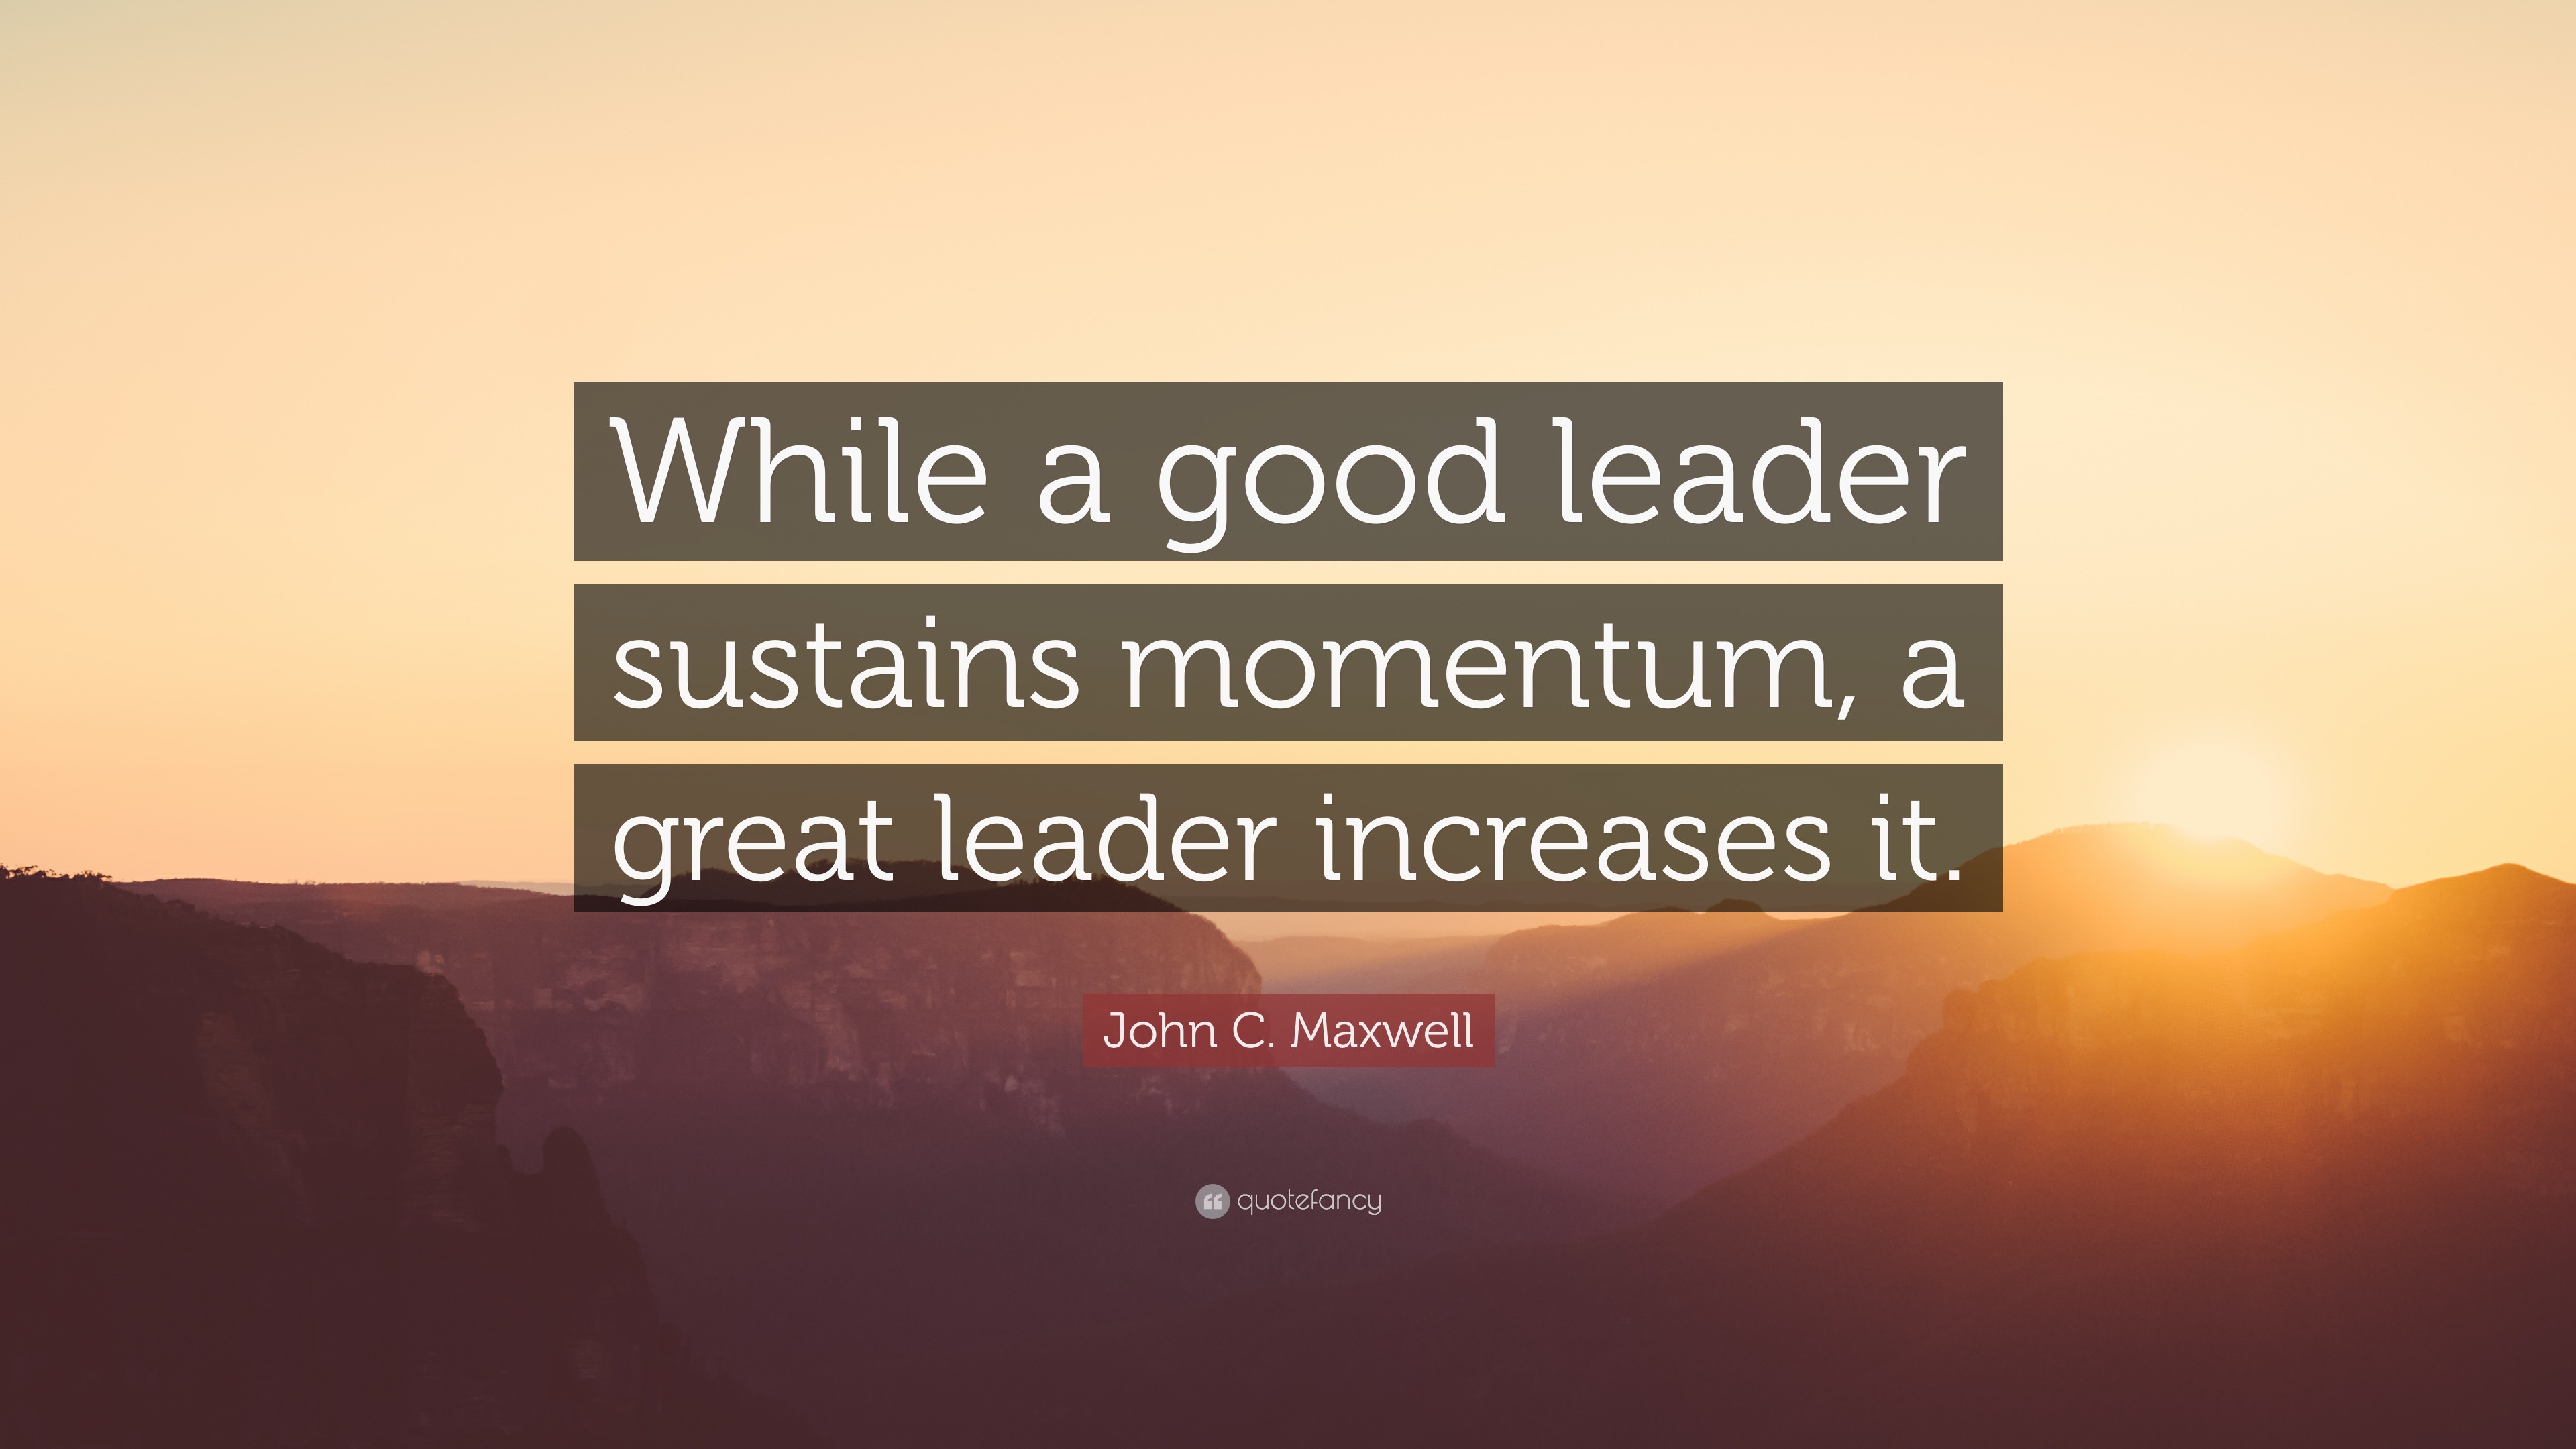 John C. Maxwell Quote: “While a good leader sustains momentum, a great ...